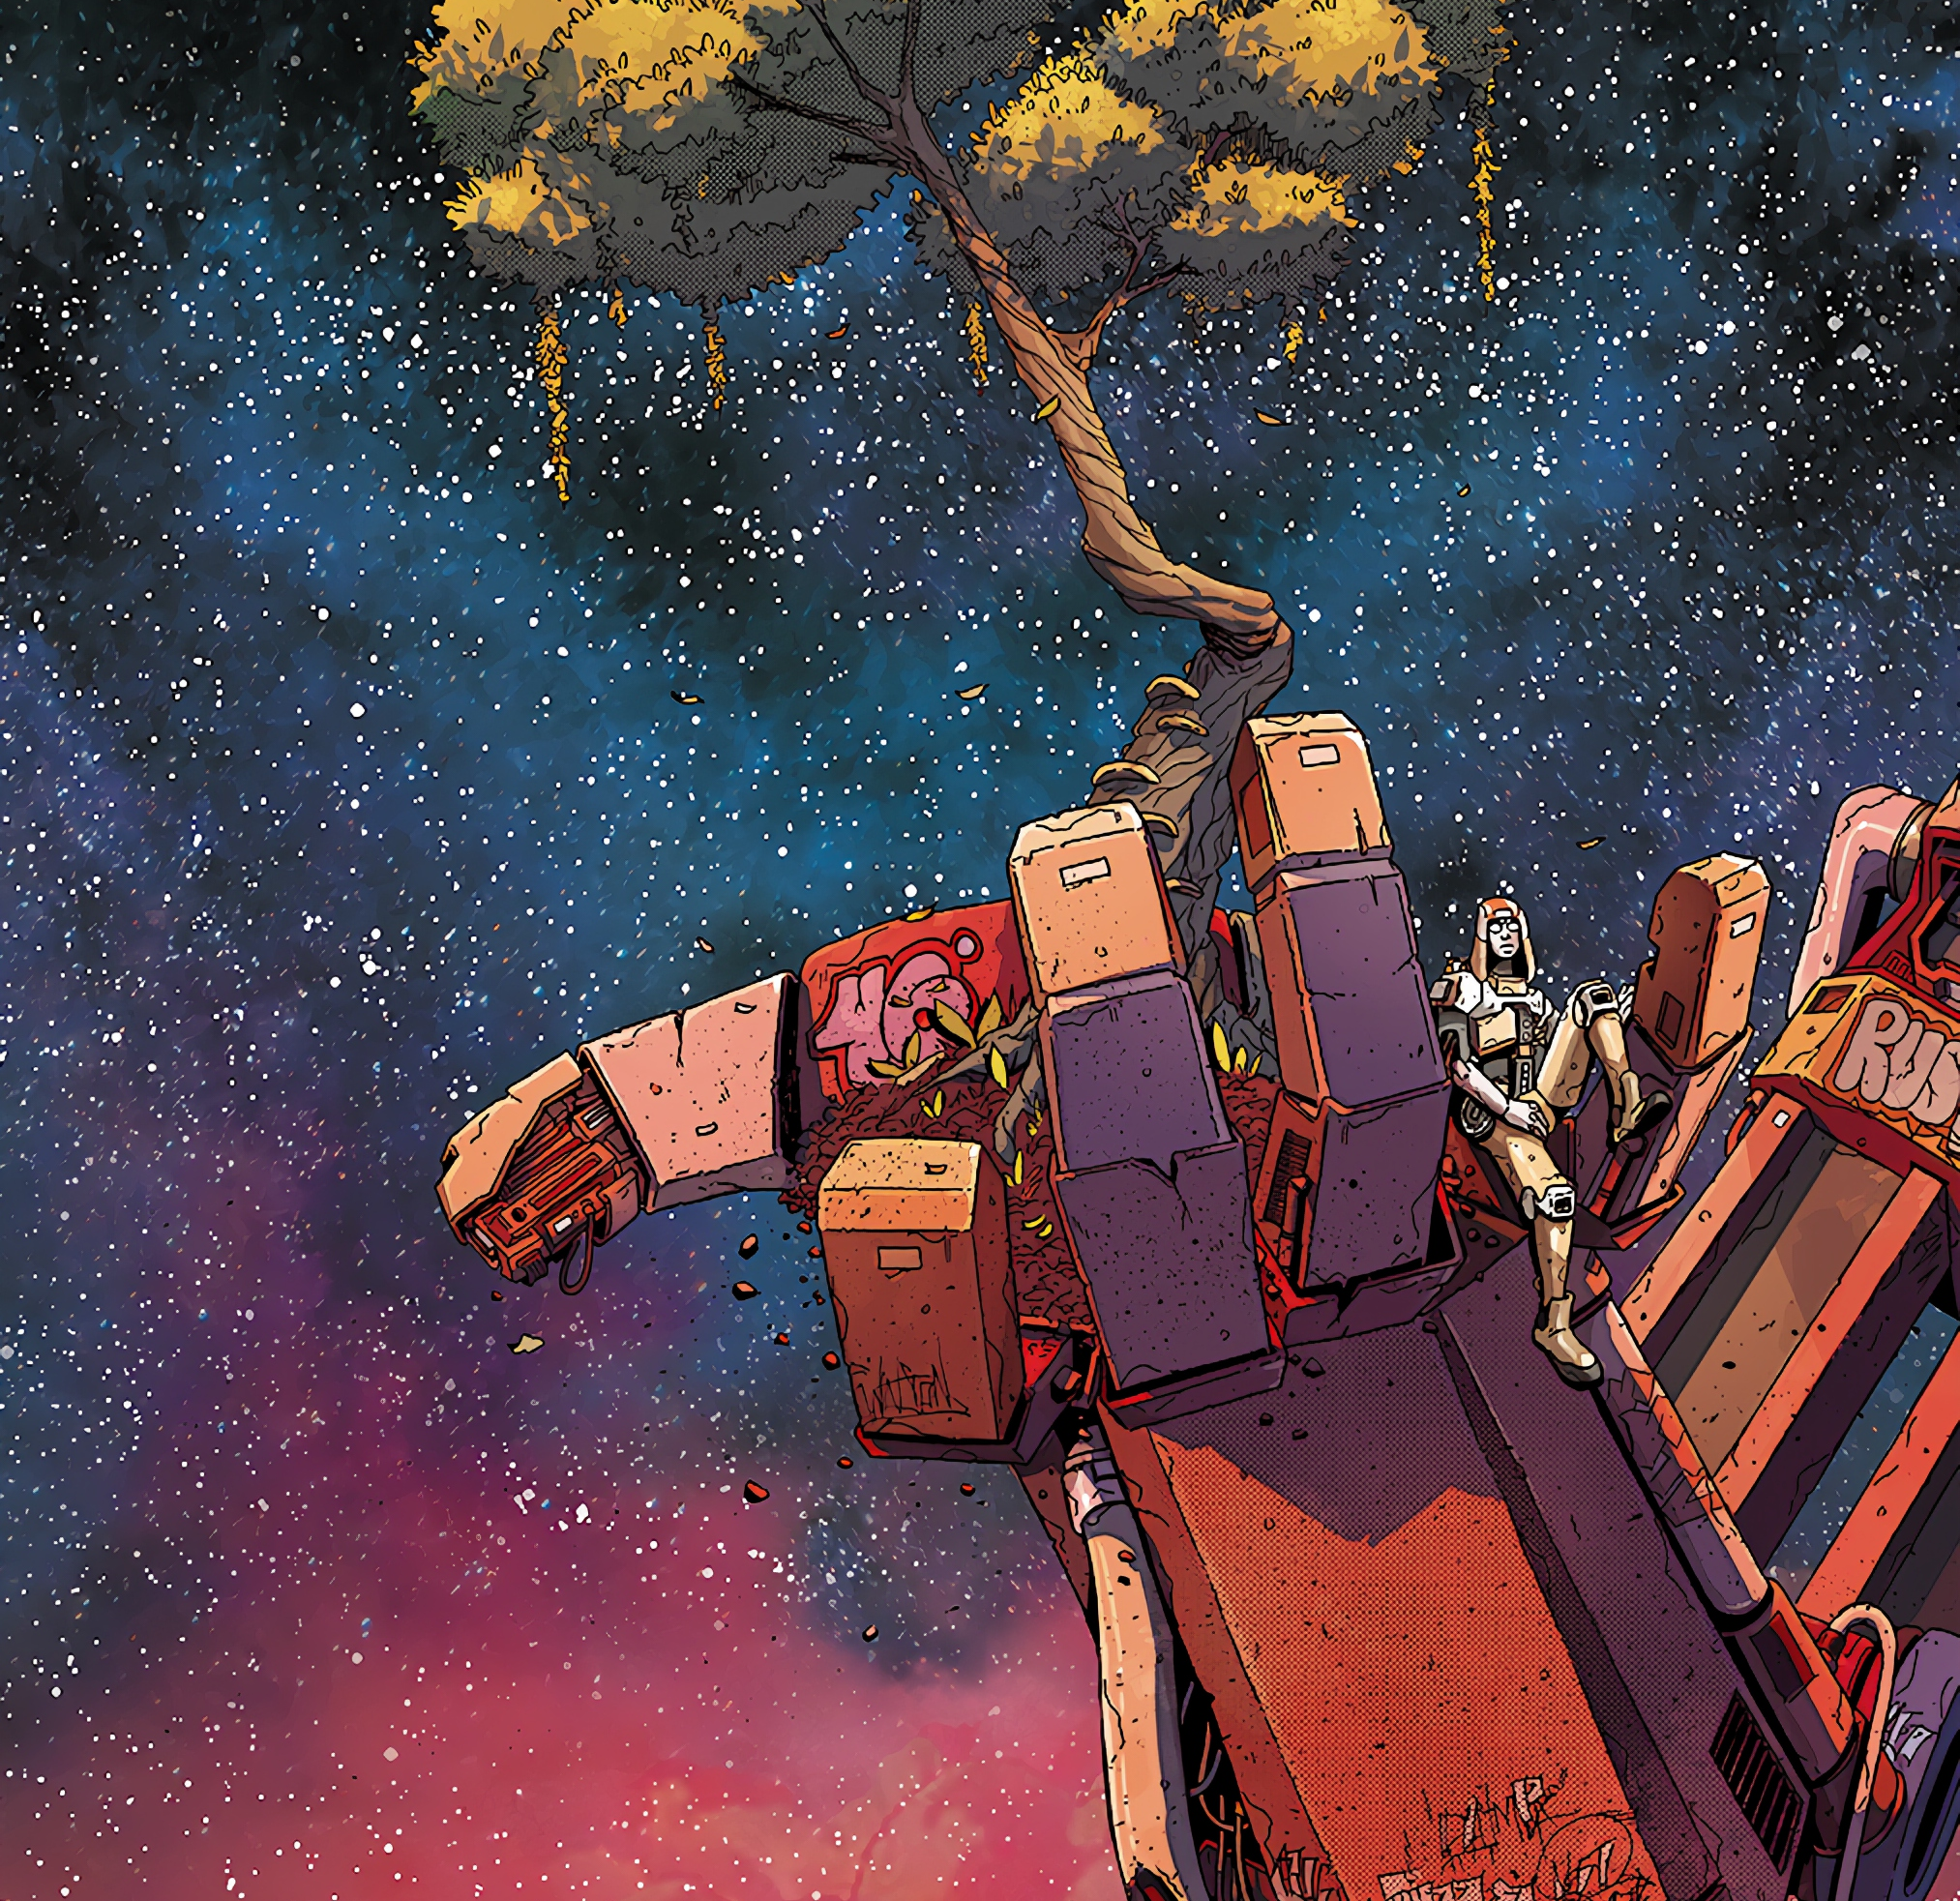 Giga #1 sells out ahead of October 28th release getting 2nd printing